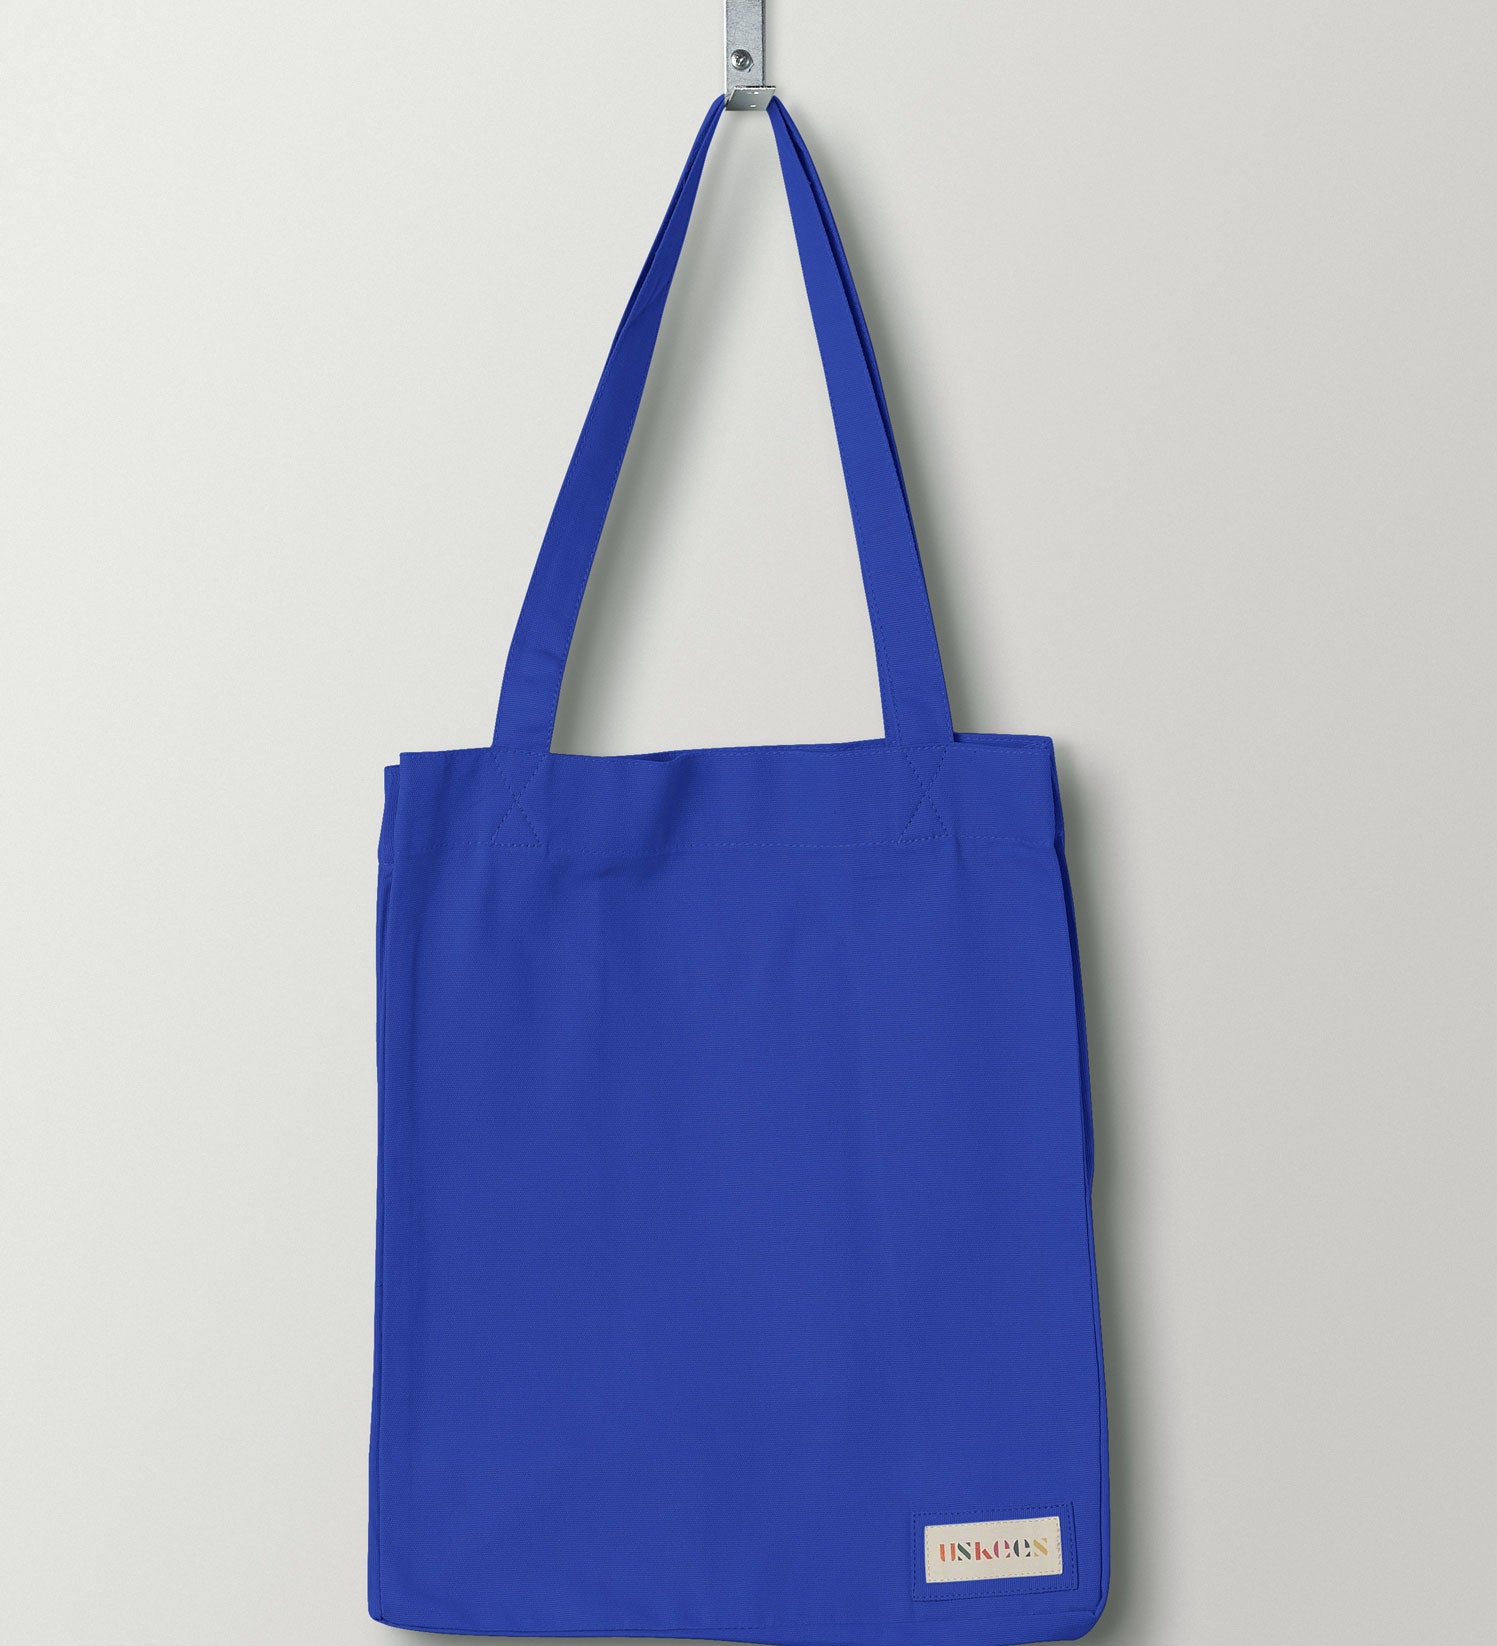 Full front hanging shot of Uskees #4002 small ultra-blue tote bag, showing double handles and Uskees woven logo.